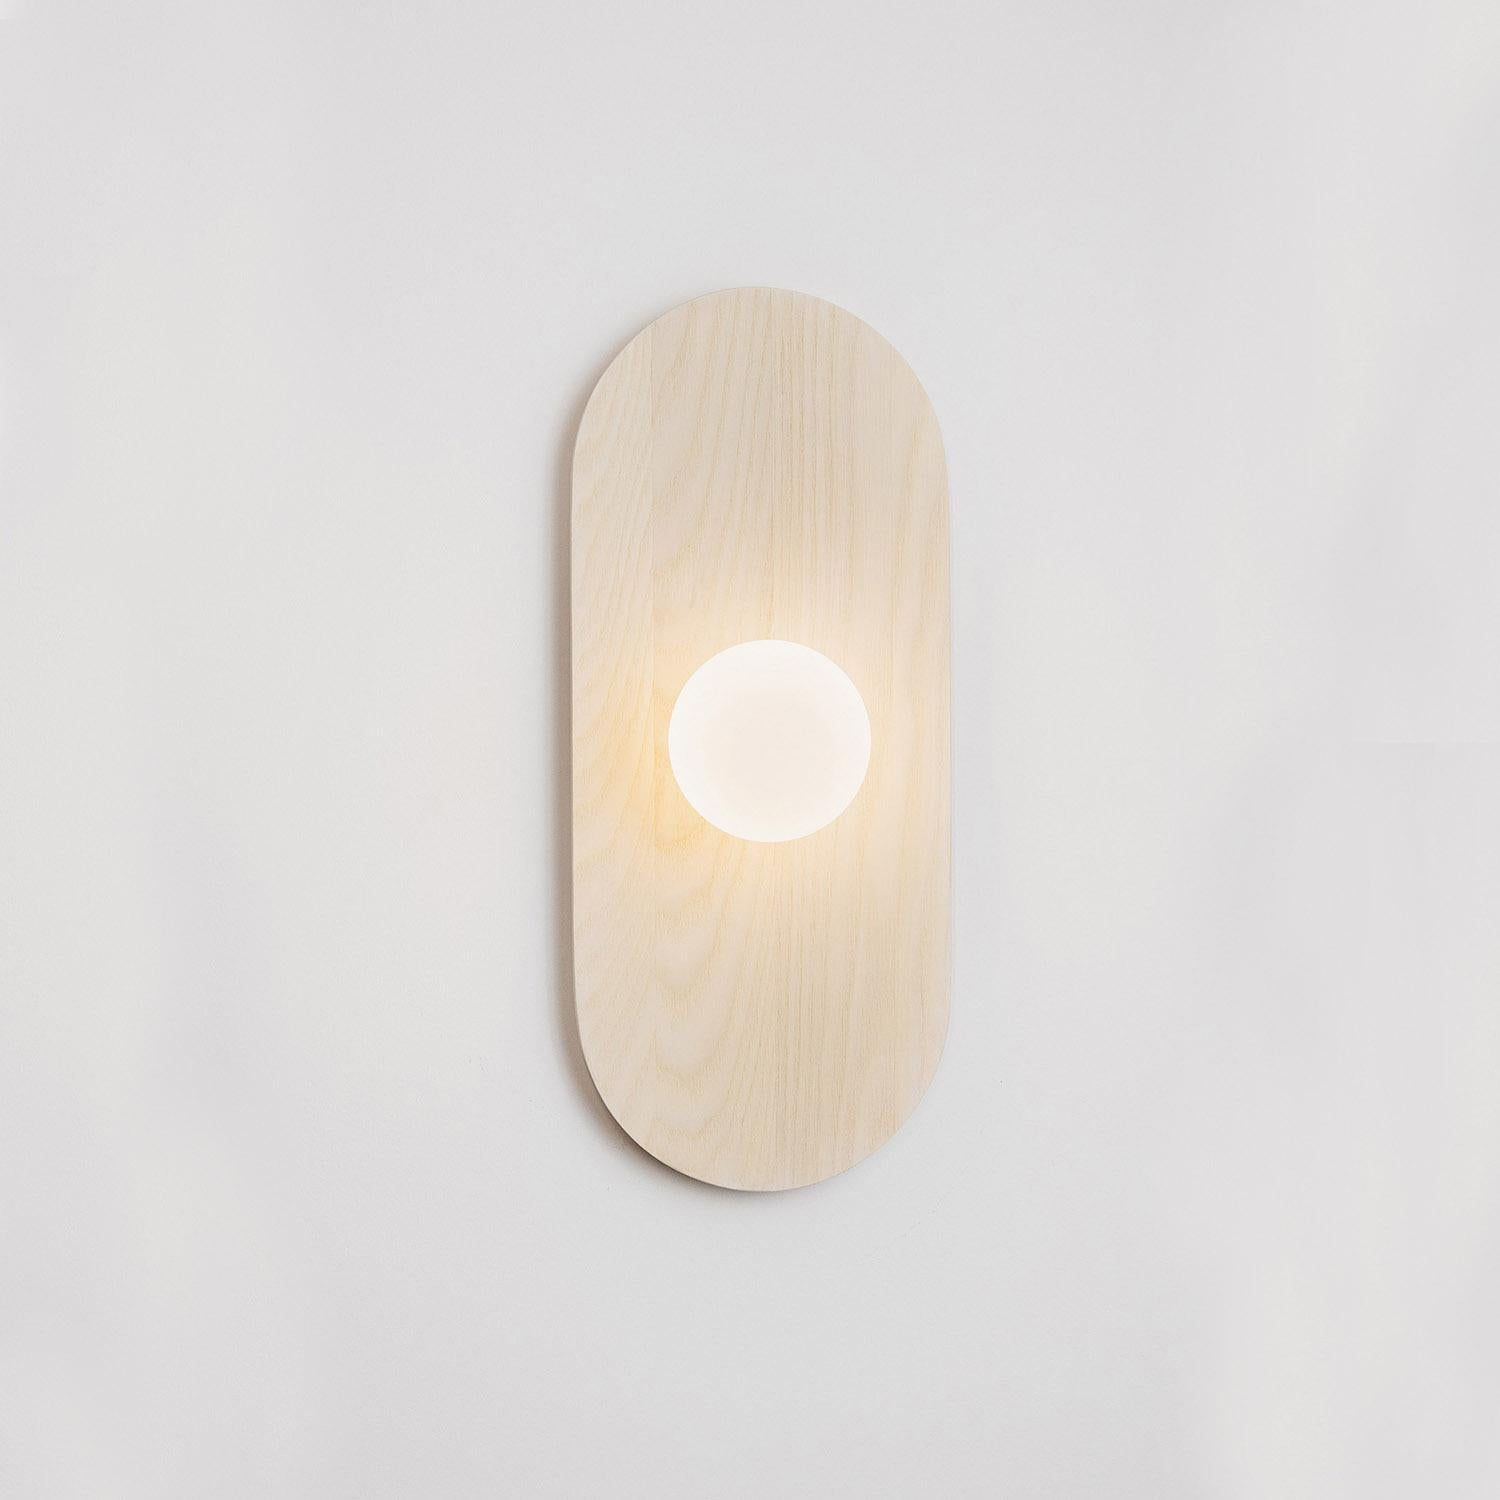 Canadian Tablet 16 wood light fixture For Sale